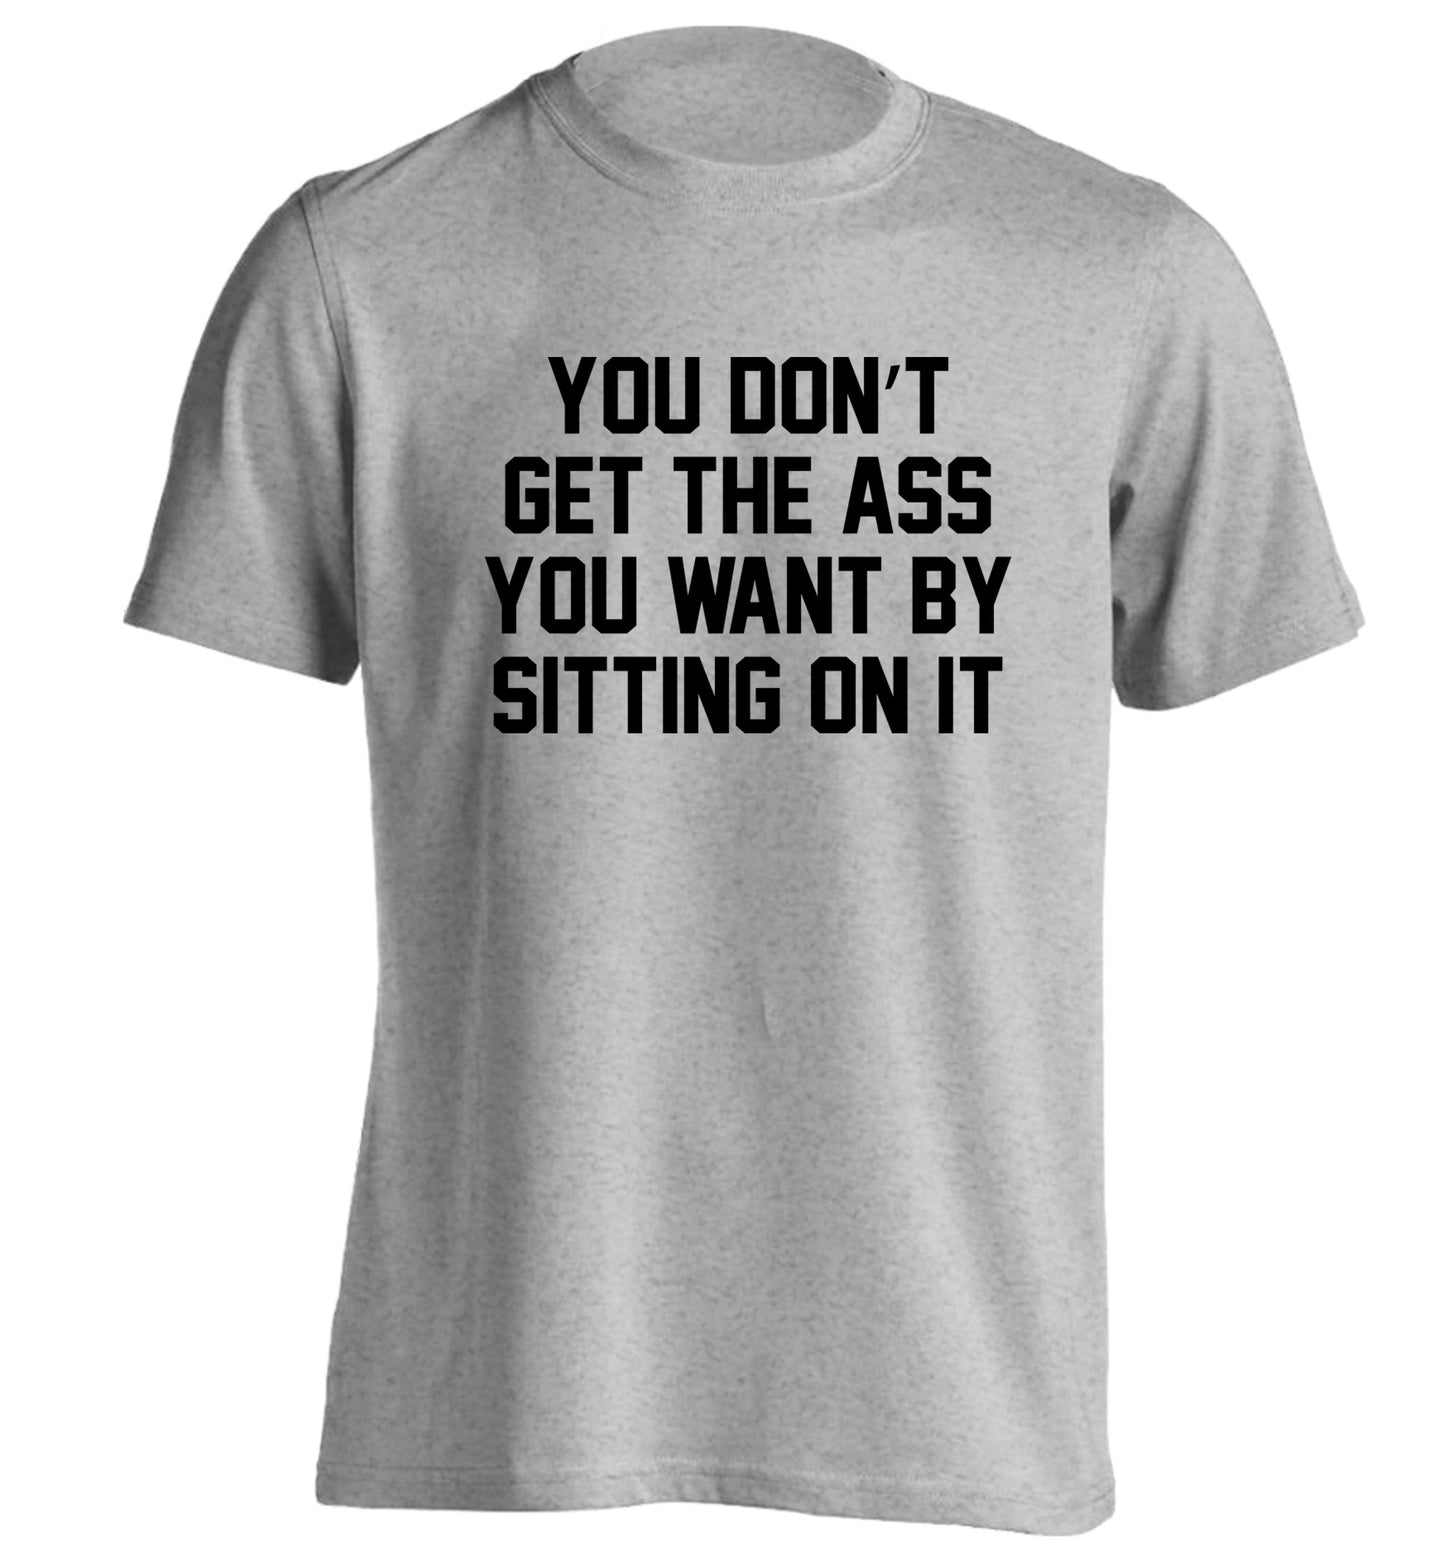 You don't get the ass you want by sitting on it adults unisex grey Tshirt 2XL